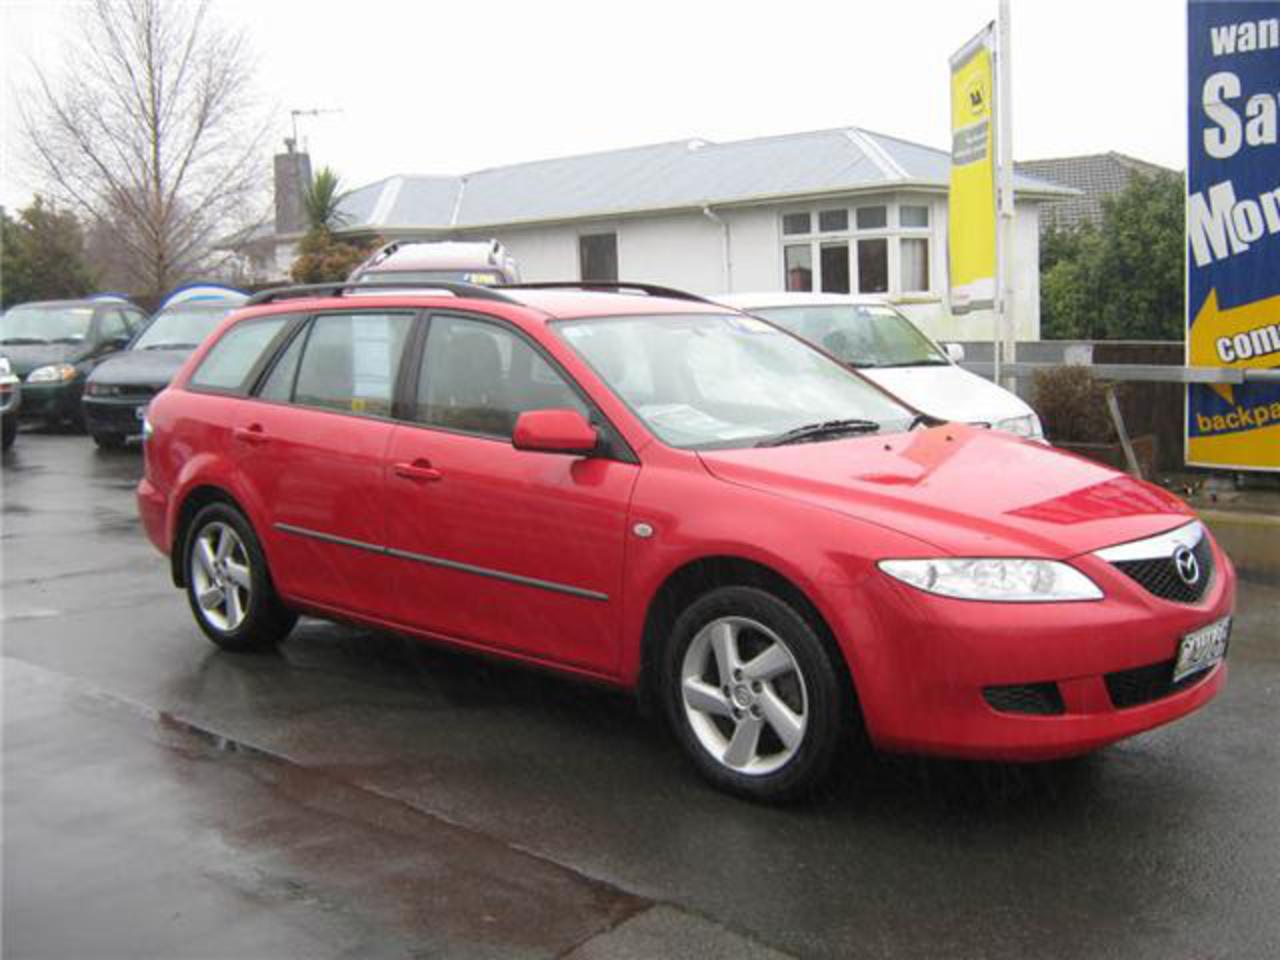 Mazda 6 23 Wagon. View Download Wallpaper. 640x480. Comments